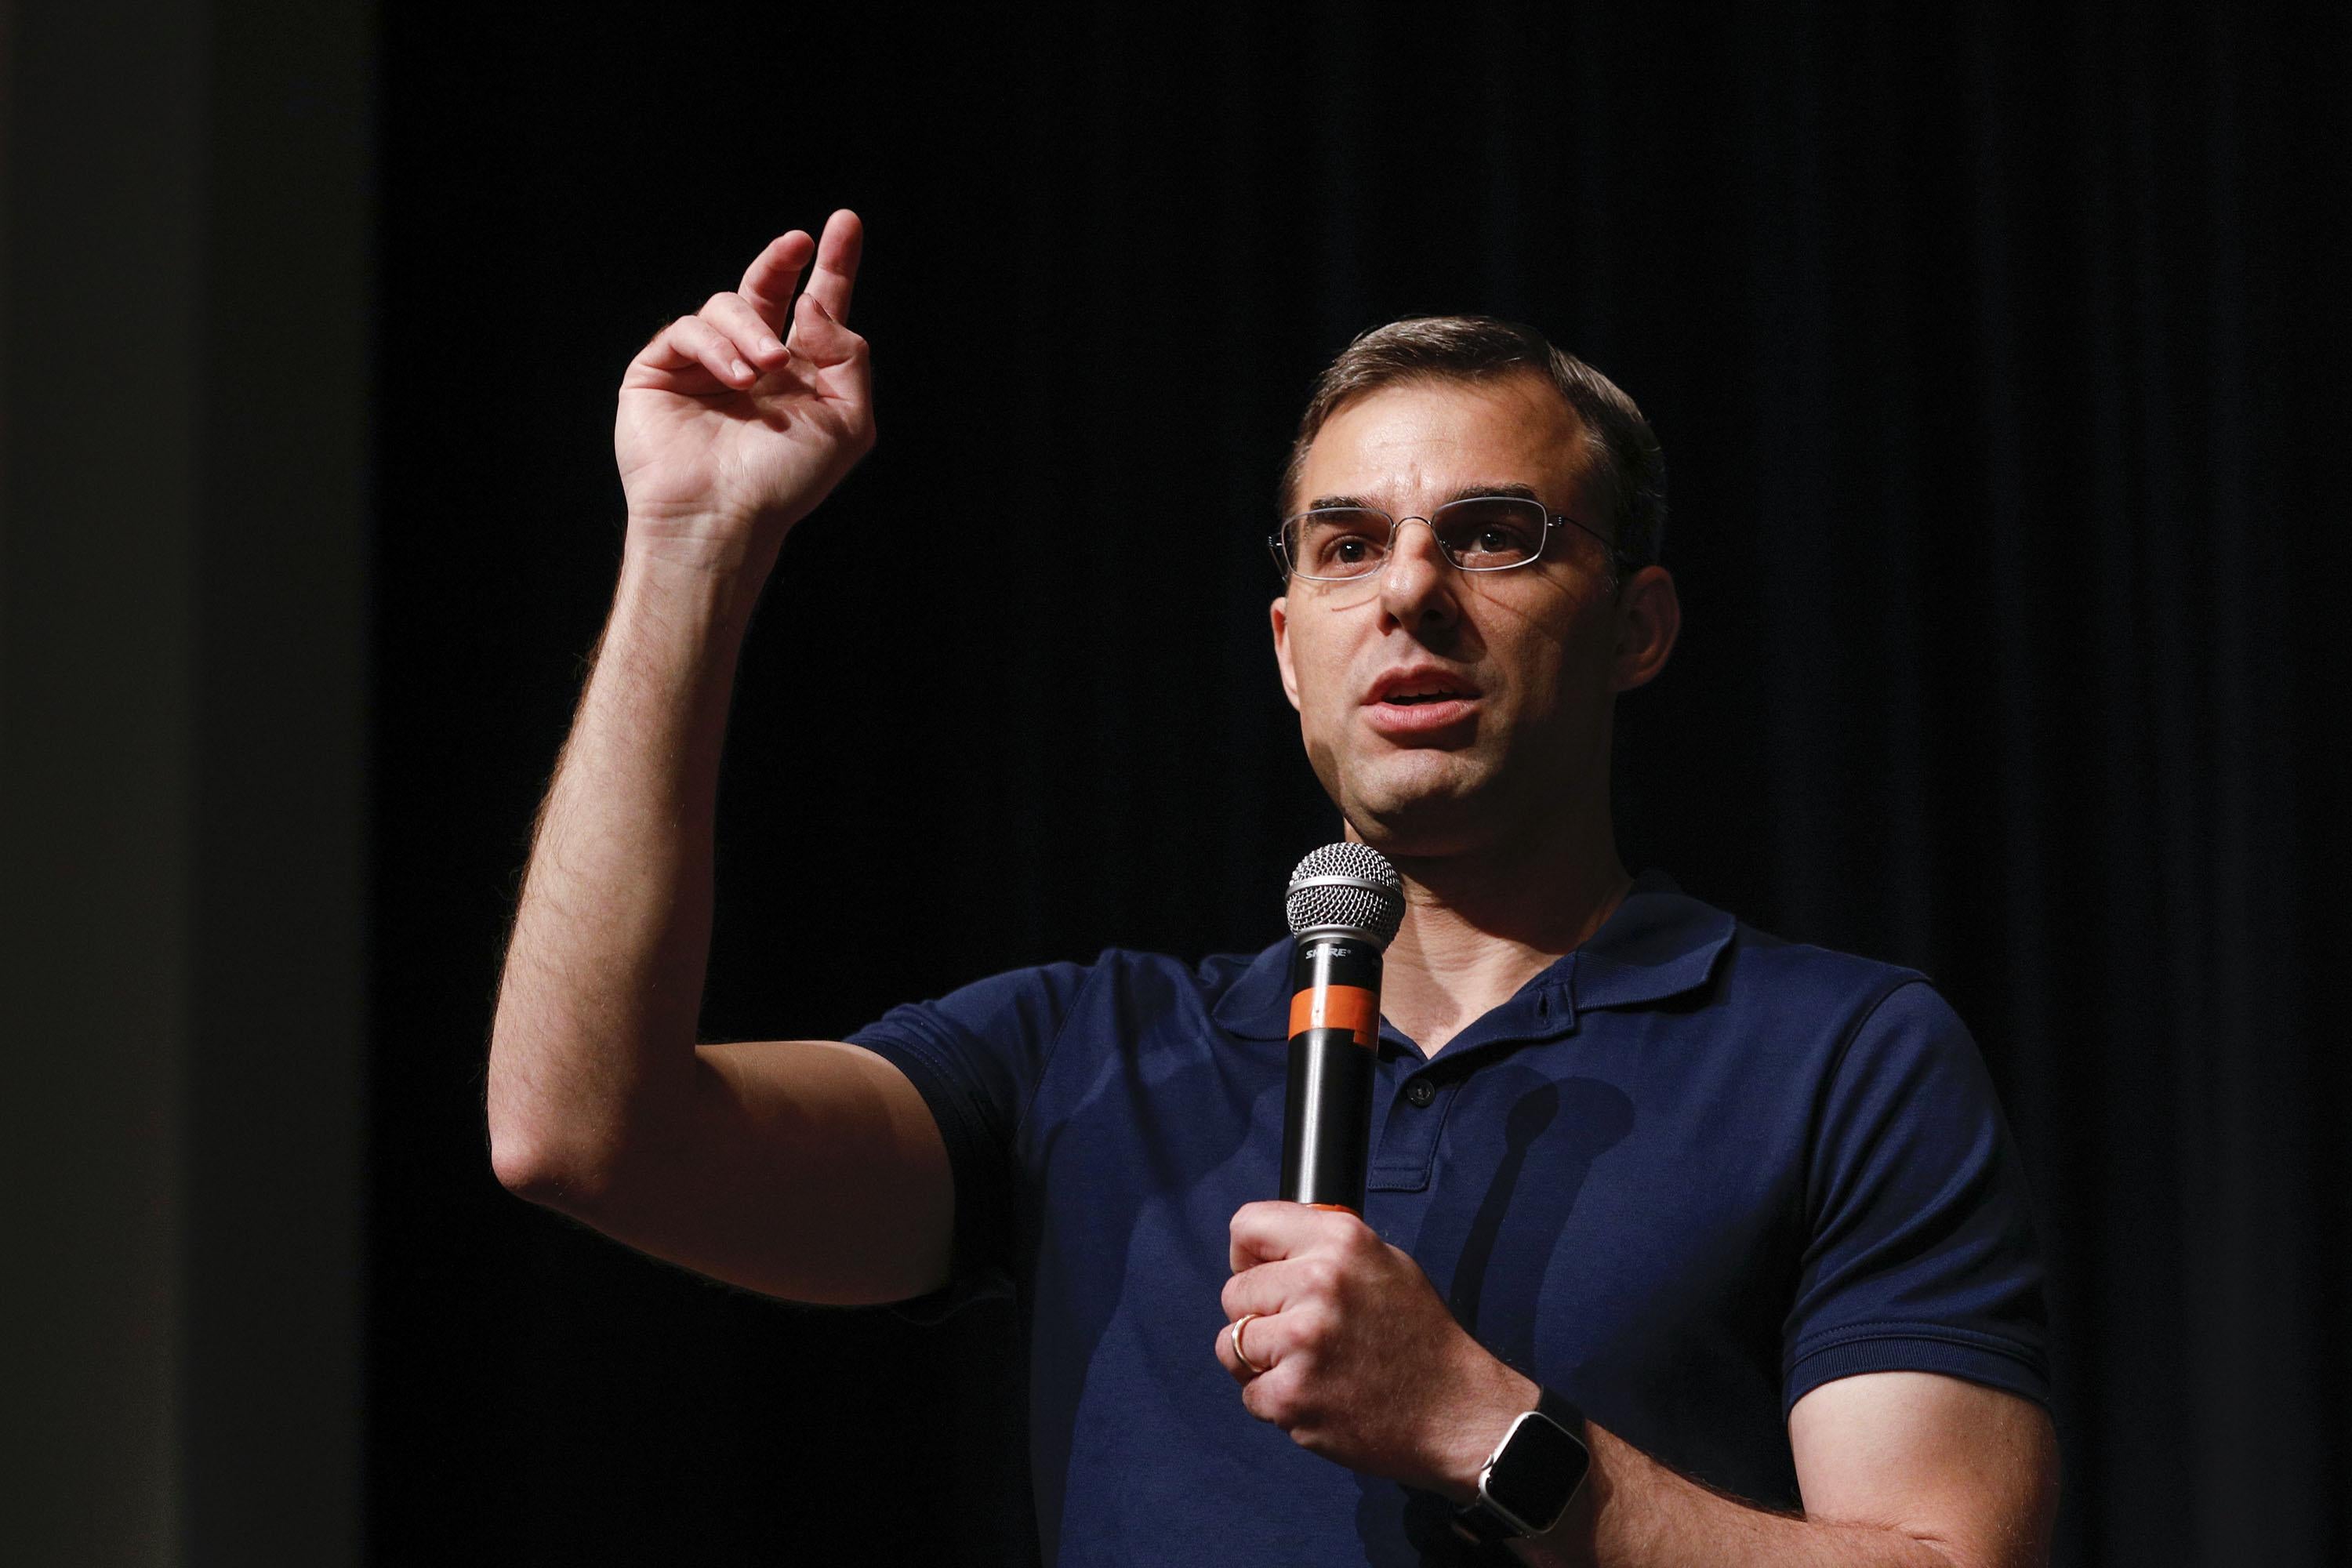 Rep. Justin Amash holds a microphone and gestures.